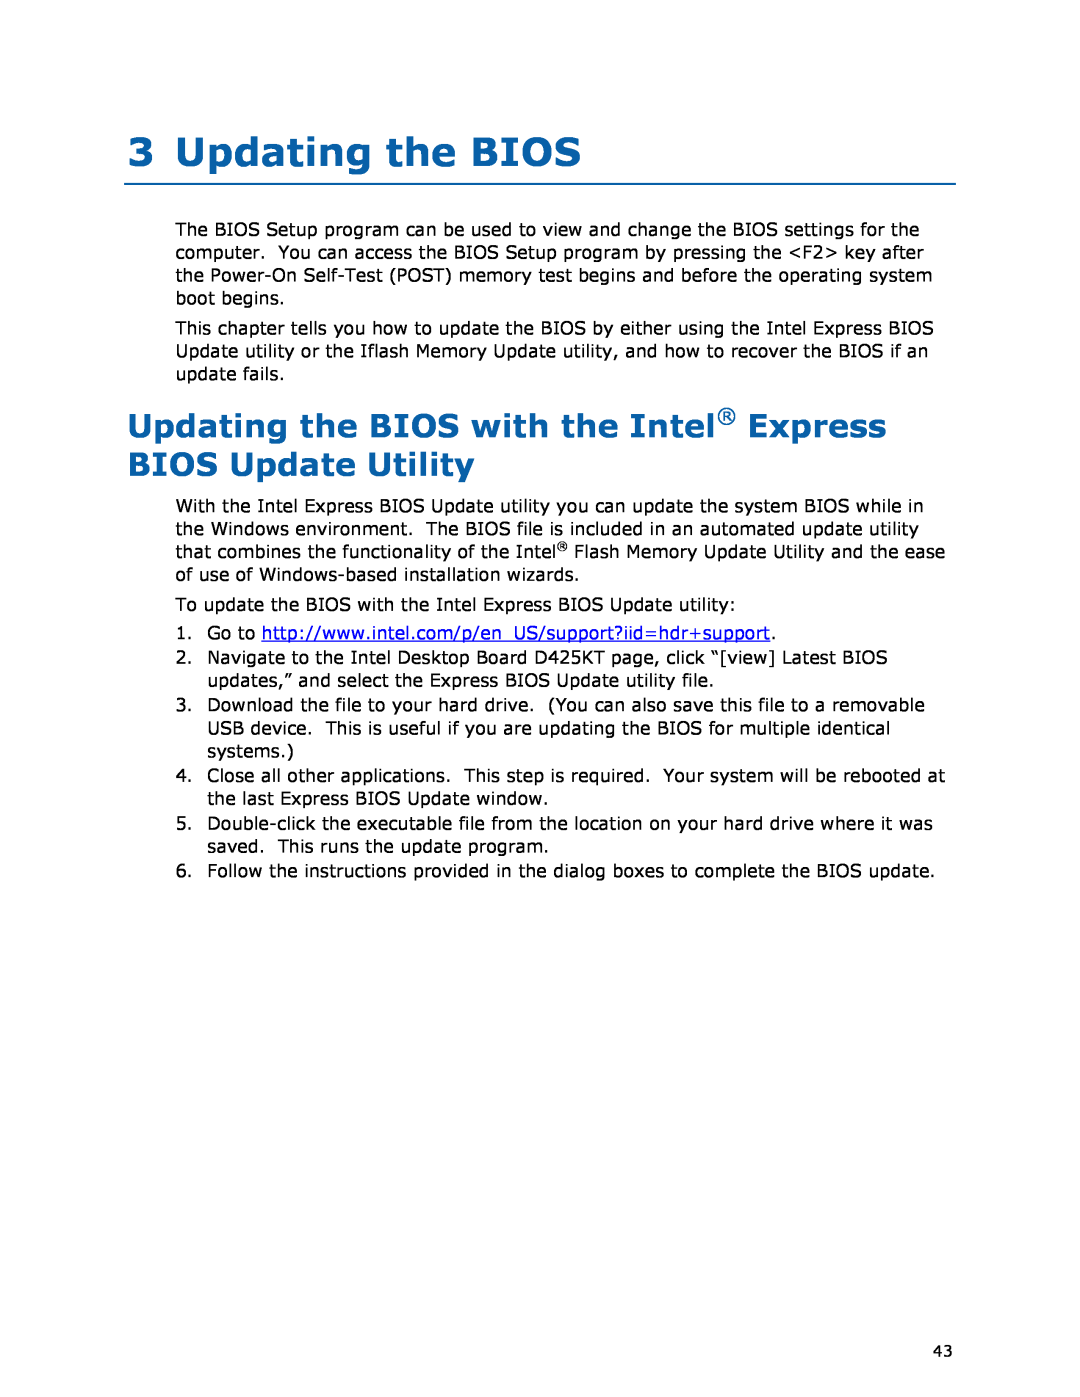 Intel D425KT manual Updating the BIOS with the Intel Express BIOS Update Utility 